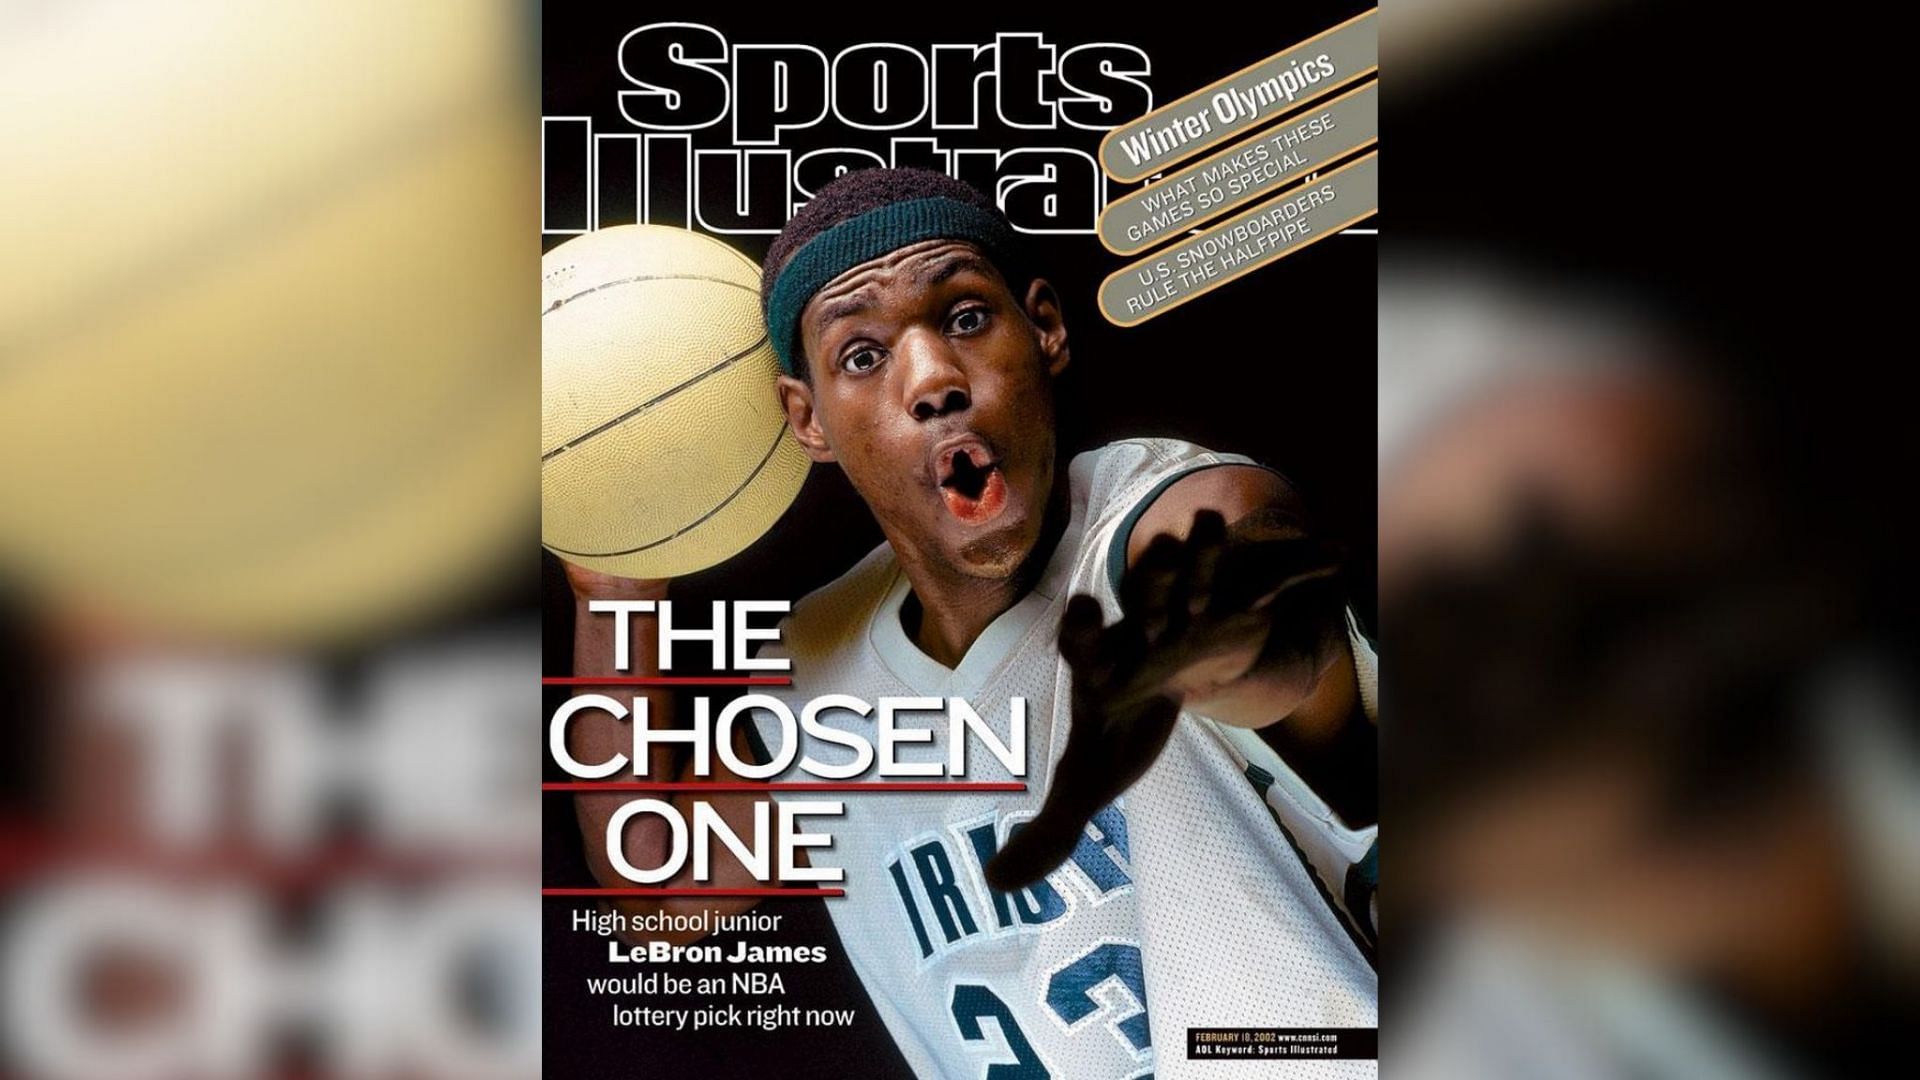 LeBron James featured in a Sports Illustrated cover